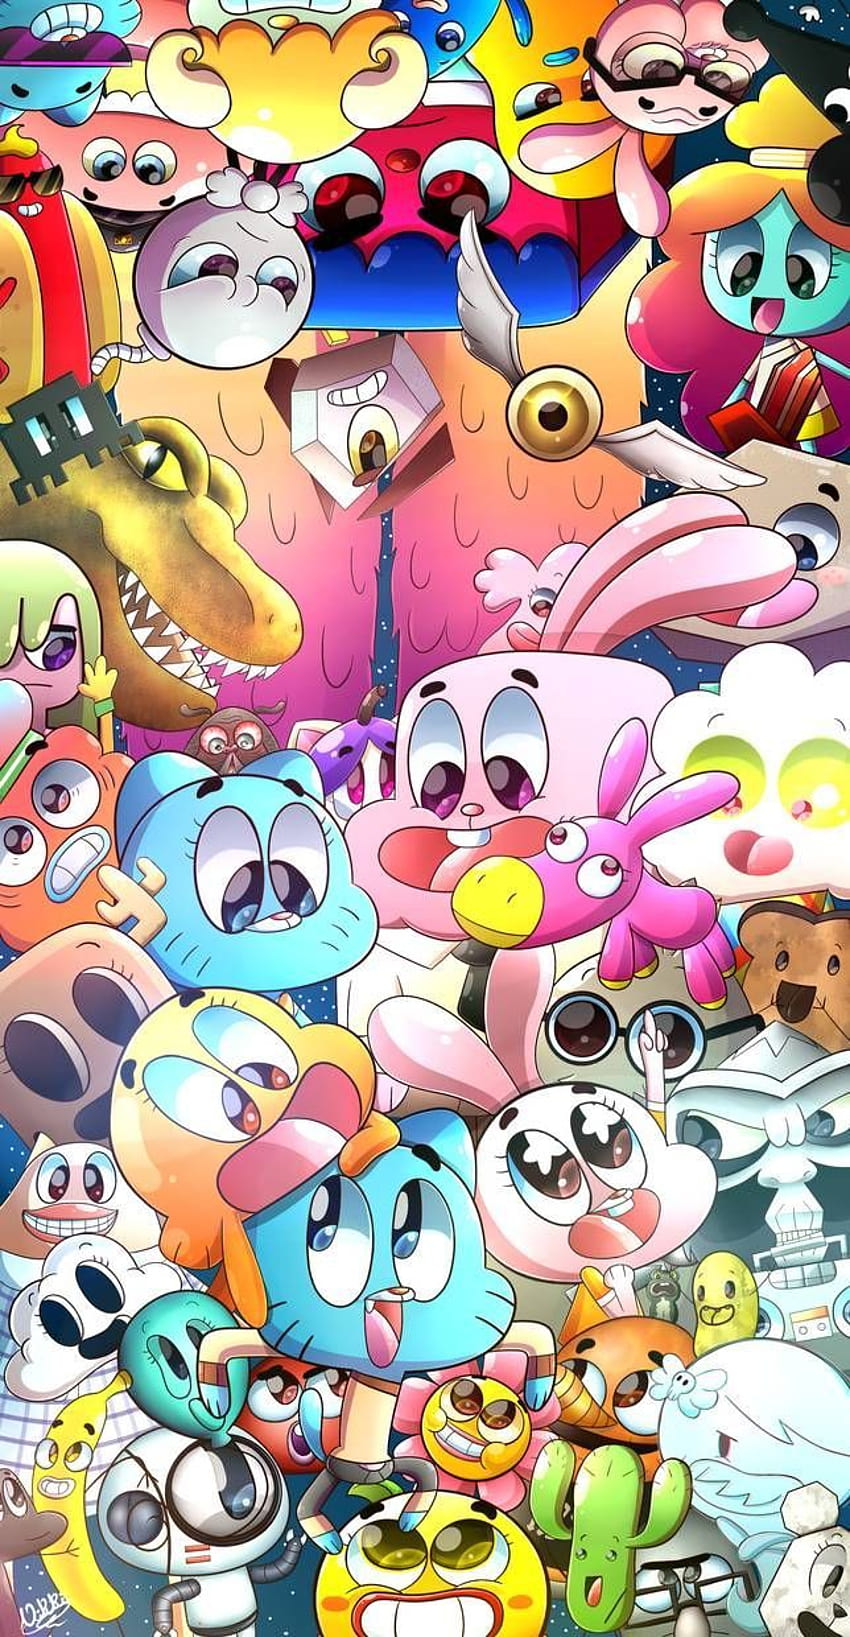 160 The Amazing World of Gumball ideas, the amazing world of gumball anime HD phone wallpaper